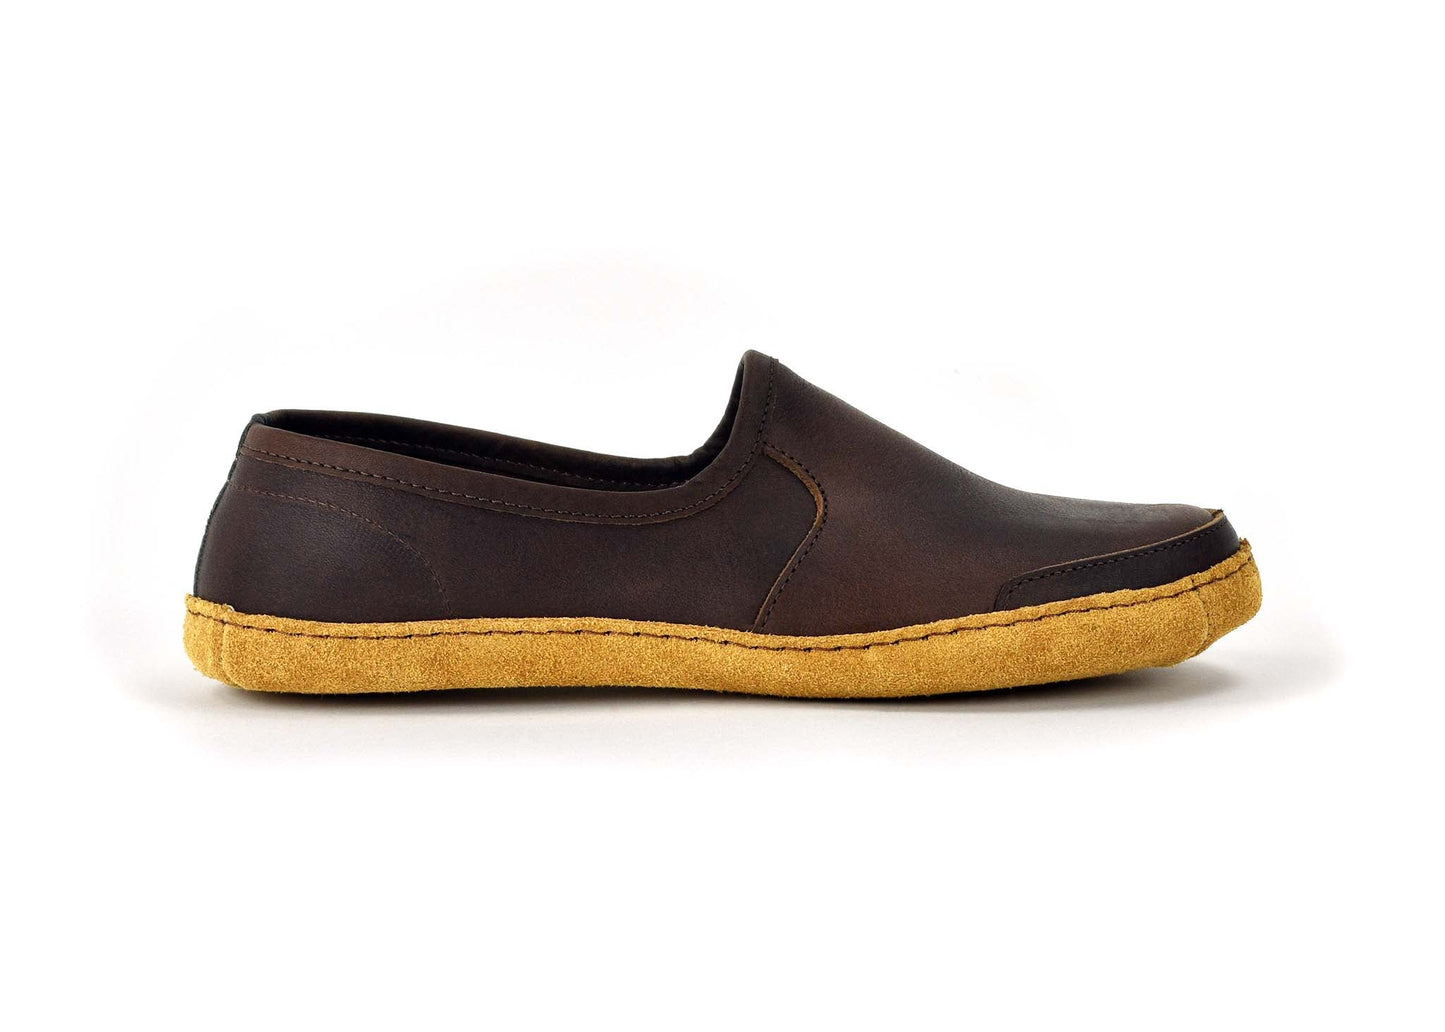 Vermont House Shoes - Loafer - Chocolate side view